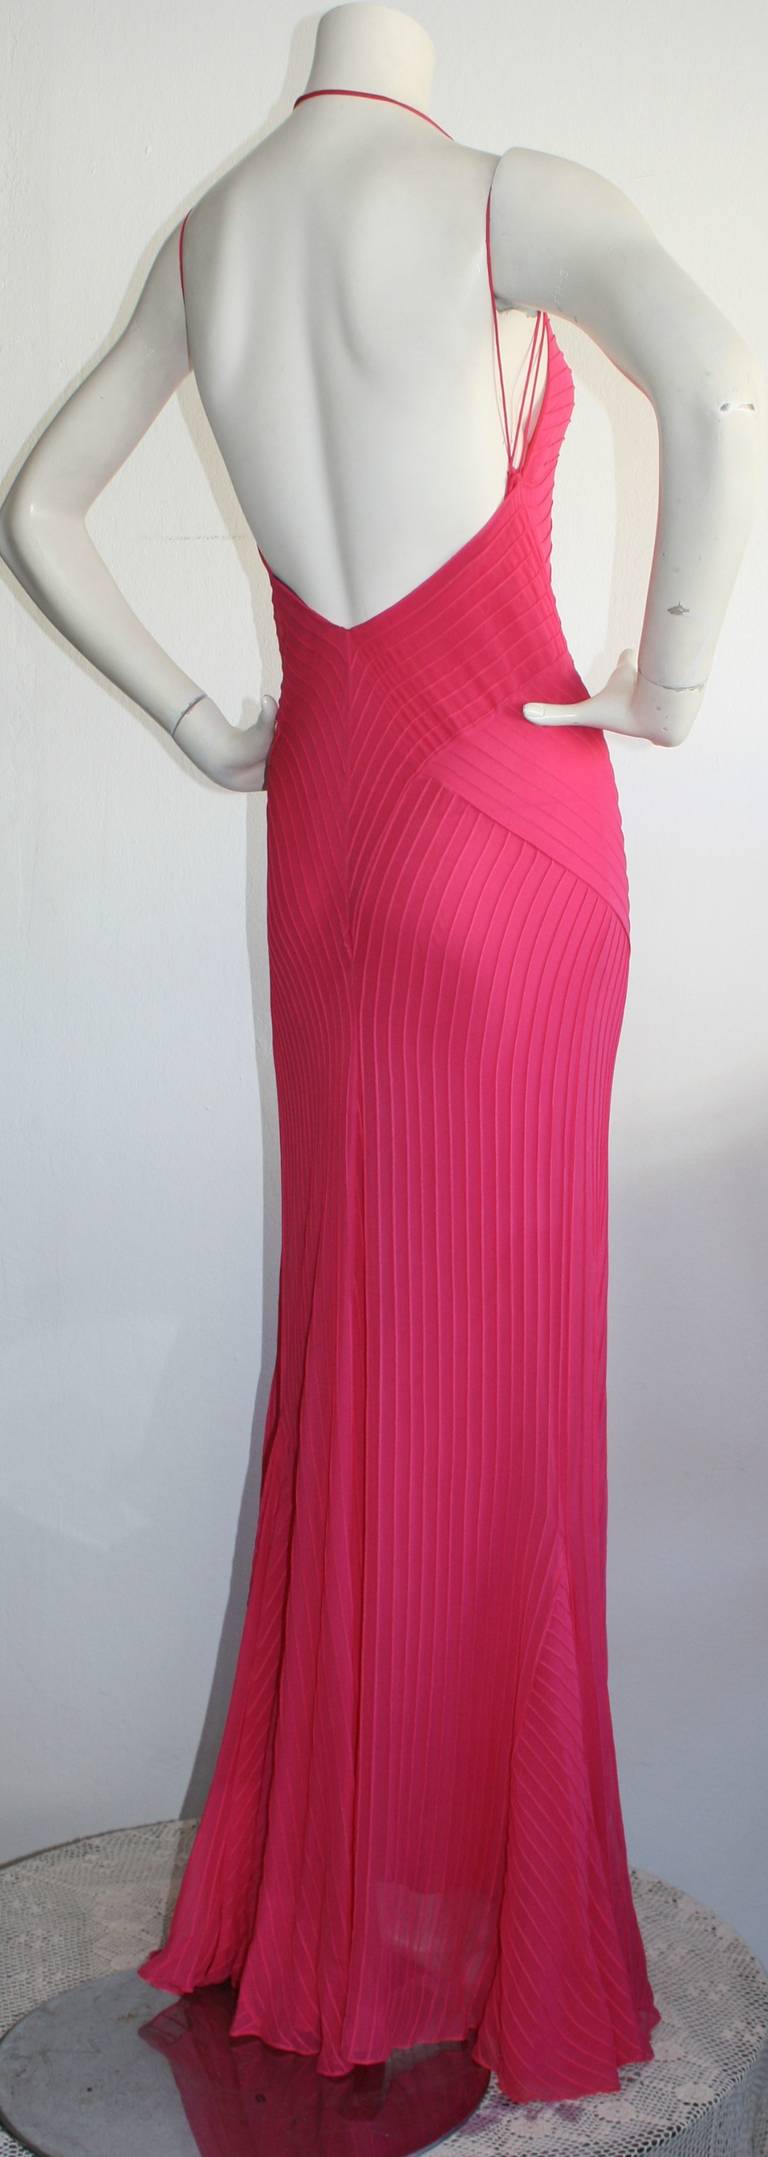 Incredible vintage Ralph Lauren hot pink silk chiffon gown! Features three spaghetti straps that form a criss-cross effect. Flattering lines. Fully lined. In great condition. Marked Size 2

Measurements:
32 inch bust
28 inch waist
38 inch